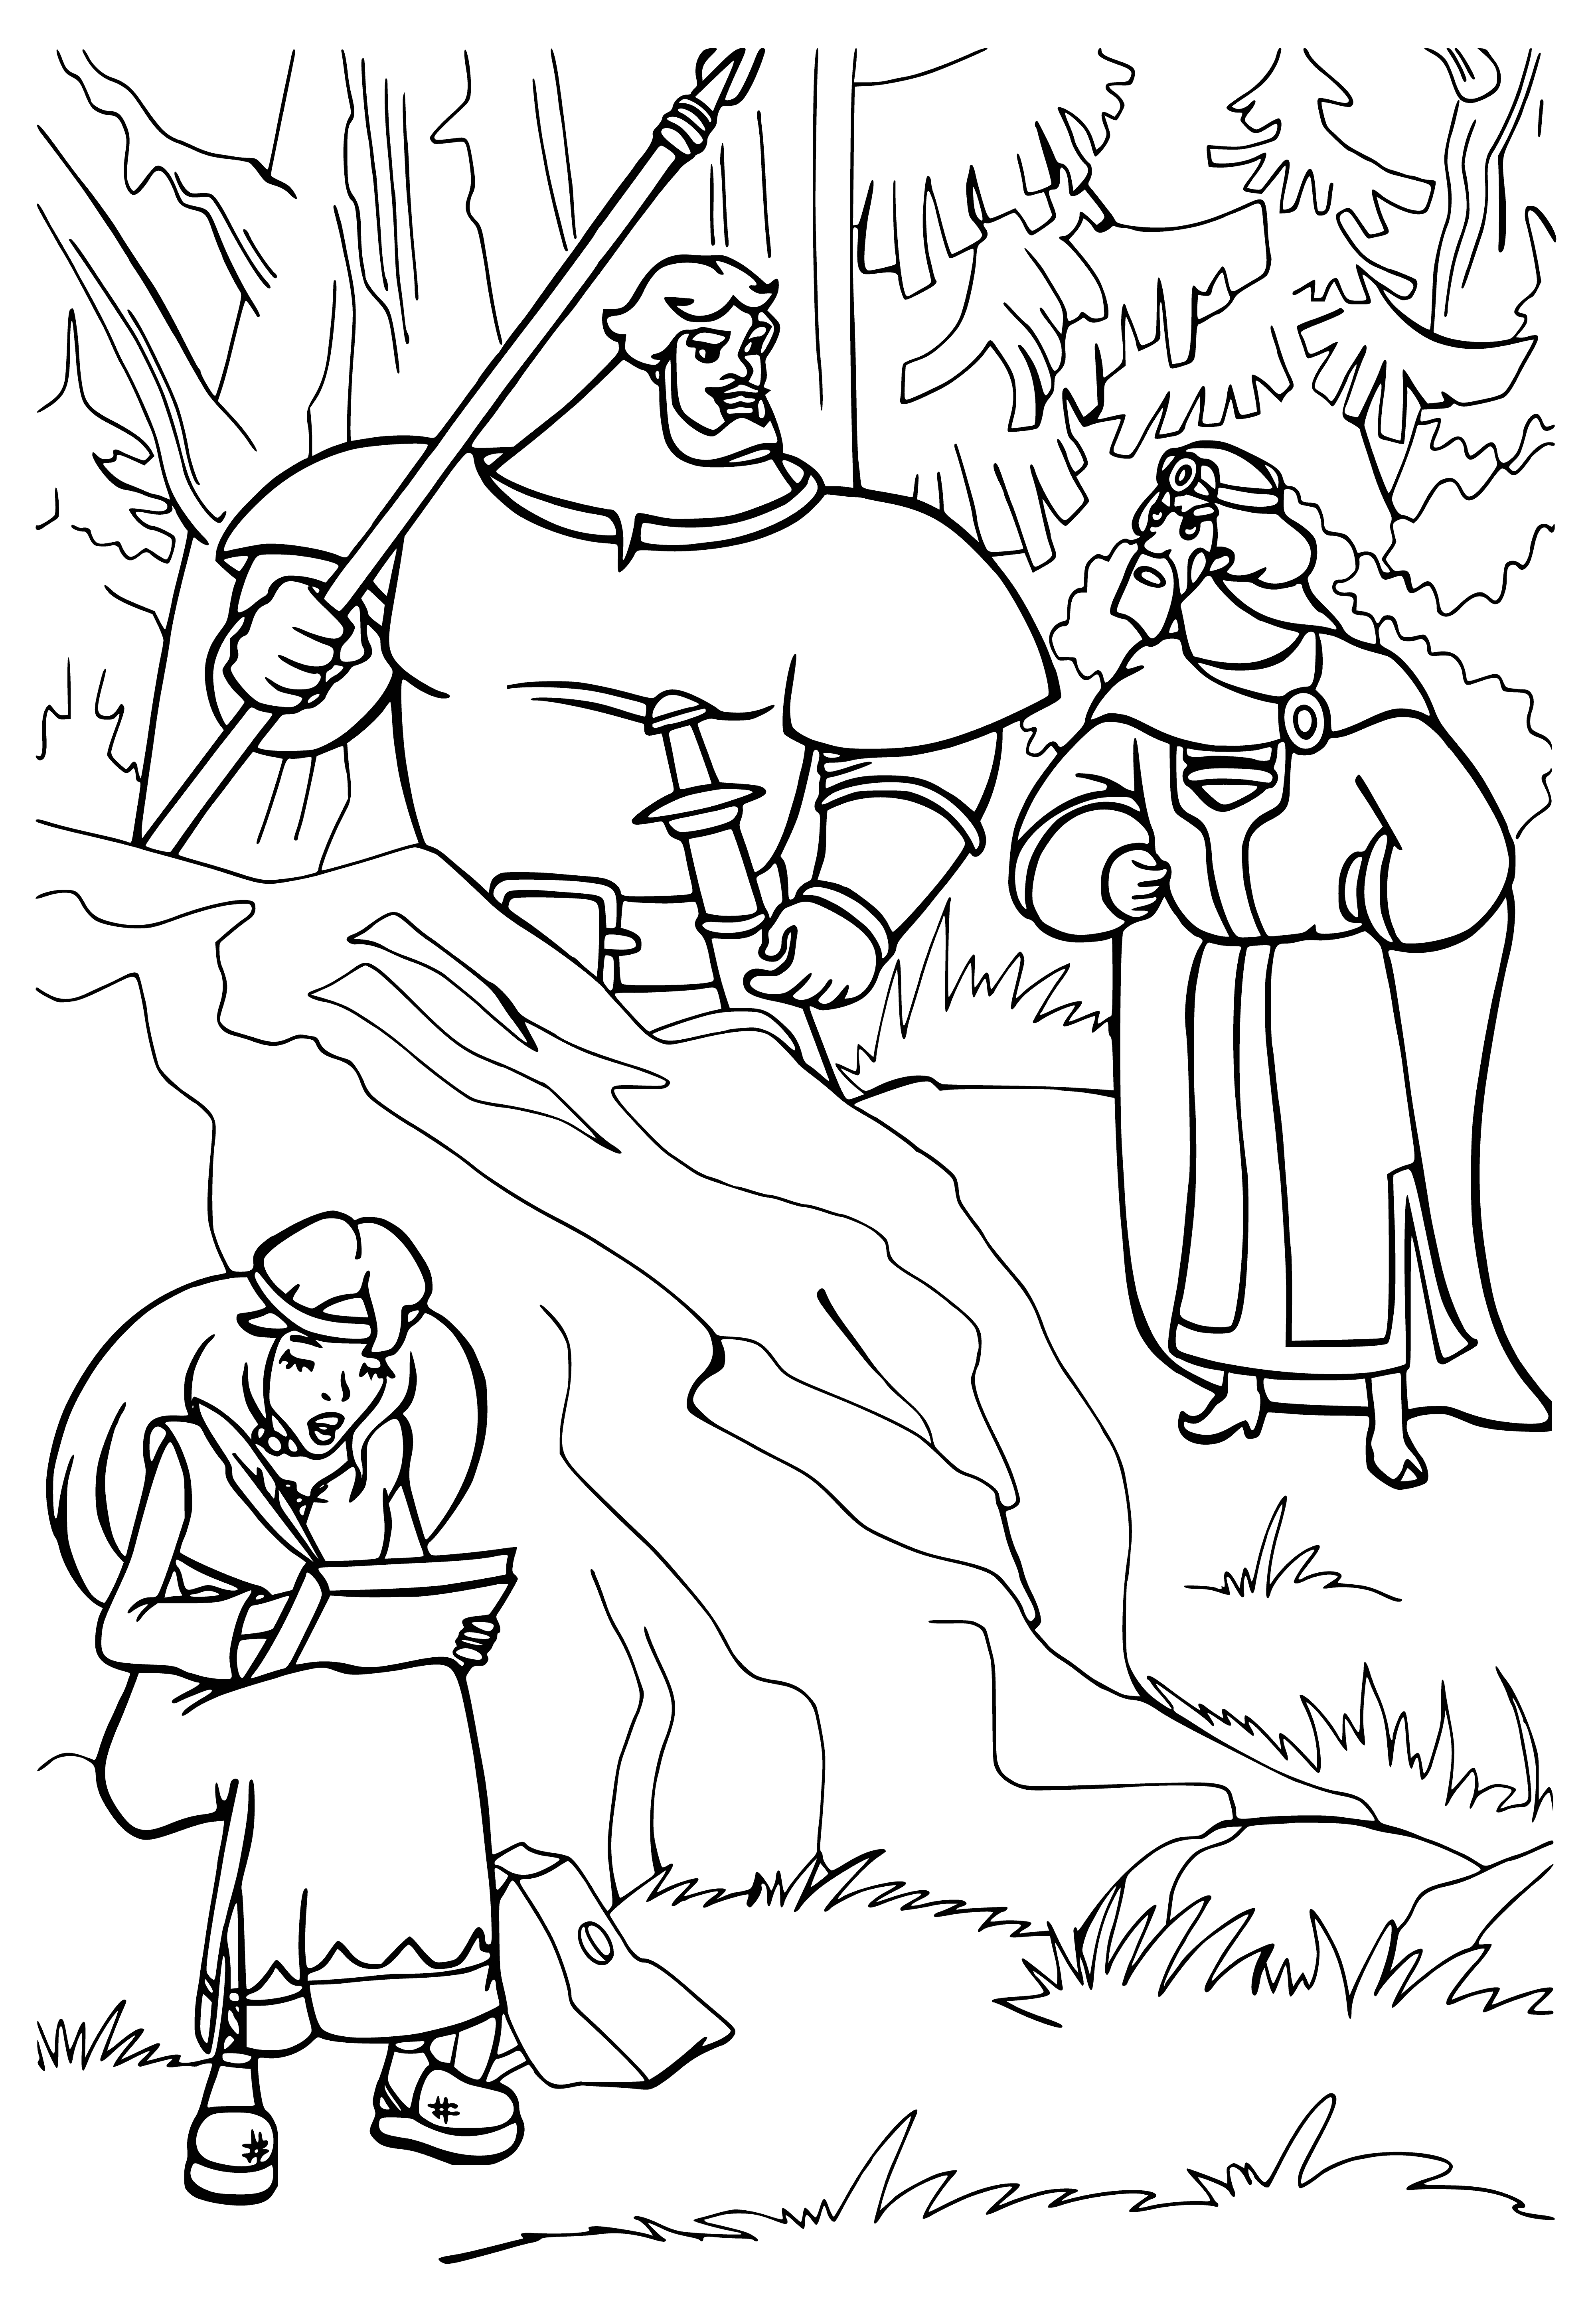 coloring page: Figures on horseback fight under an overcast sky in a wooded area with a village in the distance; one figure holds a sword, other has hands tied, bag over head. #tale